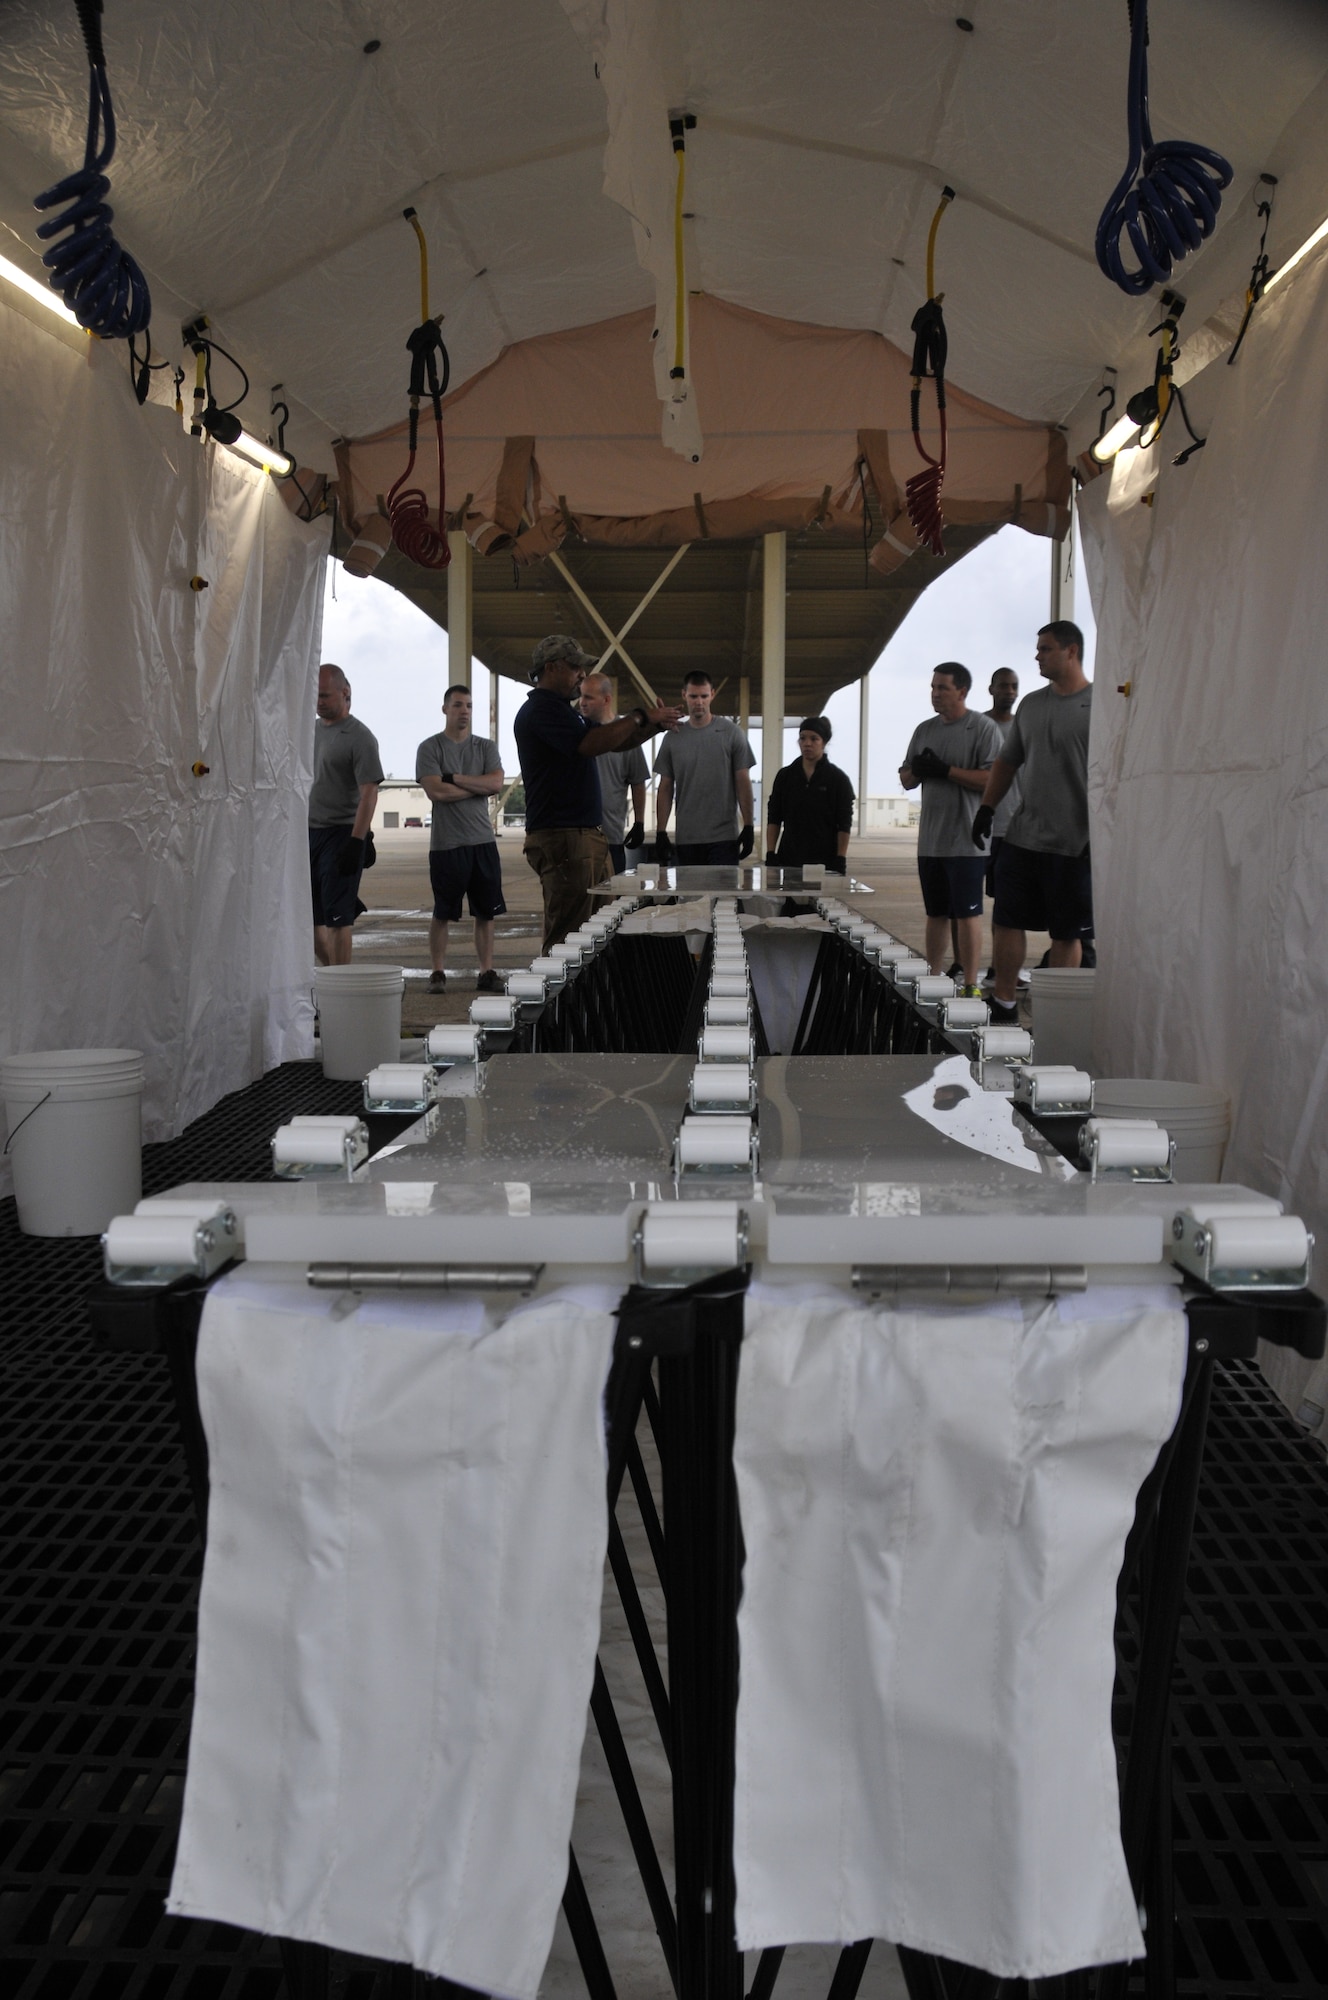 Airmen from the 188th Wing attend decontamination training at Ebbing Air National Guard Base, Arkansas, July 17. The volunteers, who were from various parts of the wing, learned how to set up a decontamination tent and clean victims of various chemical or nuclear hazards. This training will aid the wing in its mission to support Arkansas citizens in times of disaster. (U.S. Air National Guard photo by Staff Sgt. John Suleski/released)